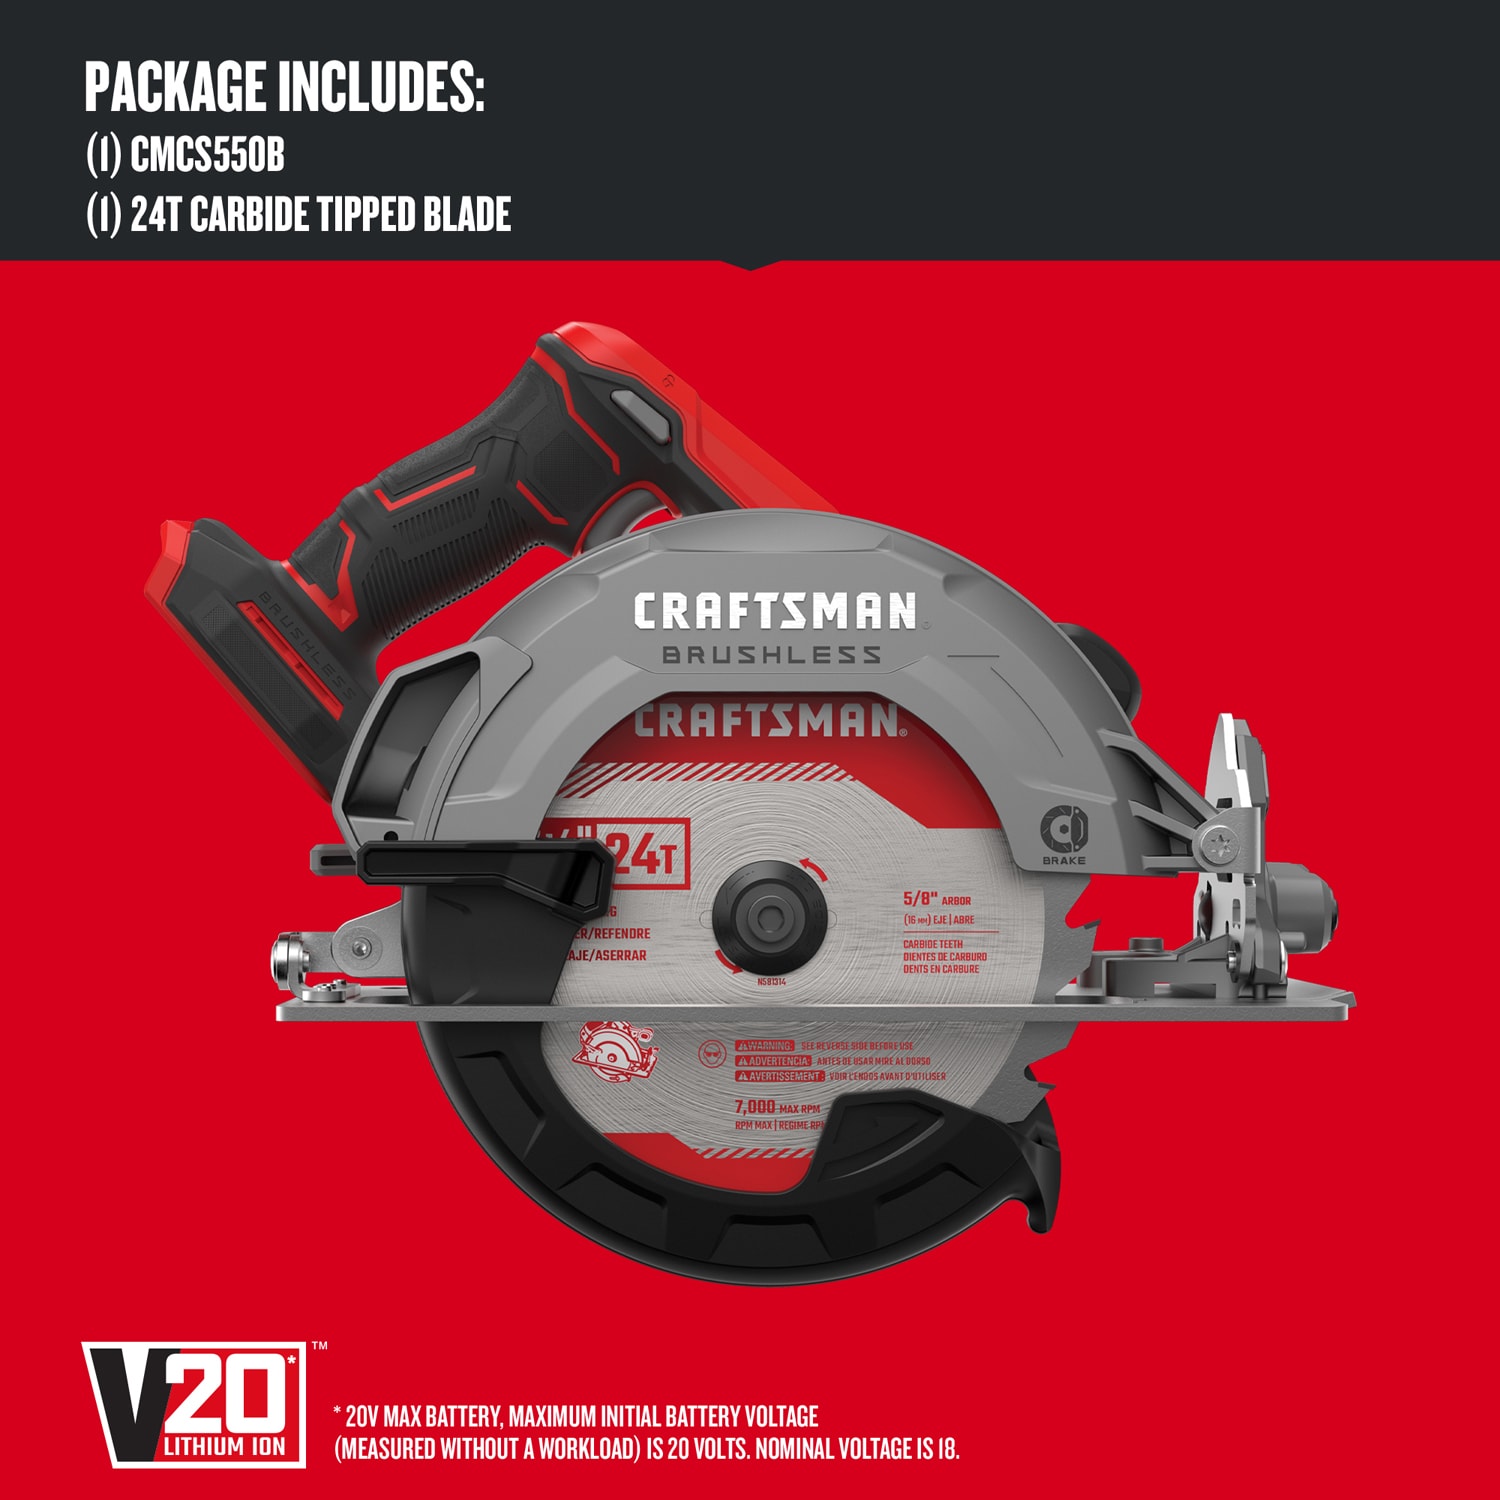 CRAFTSMAN V20 Cordless Circular Saw Kit, 6-1 inch, Battery and Charger Included (CMCS500M1) - 3